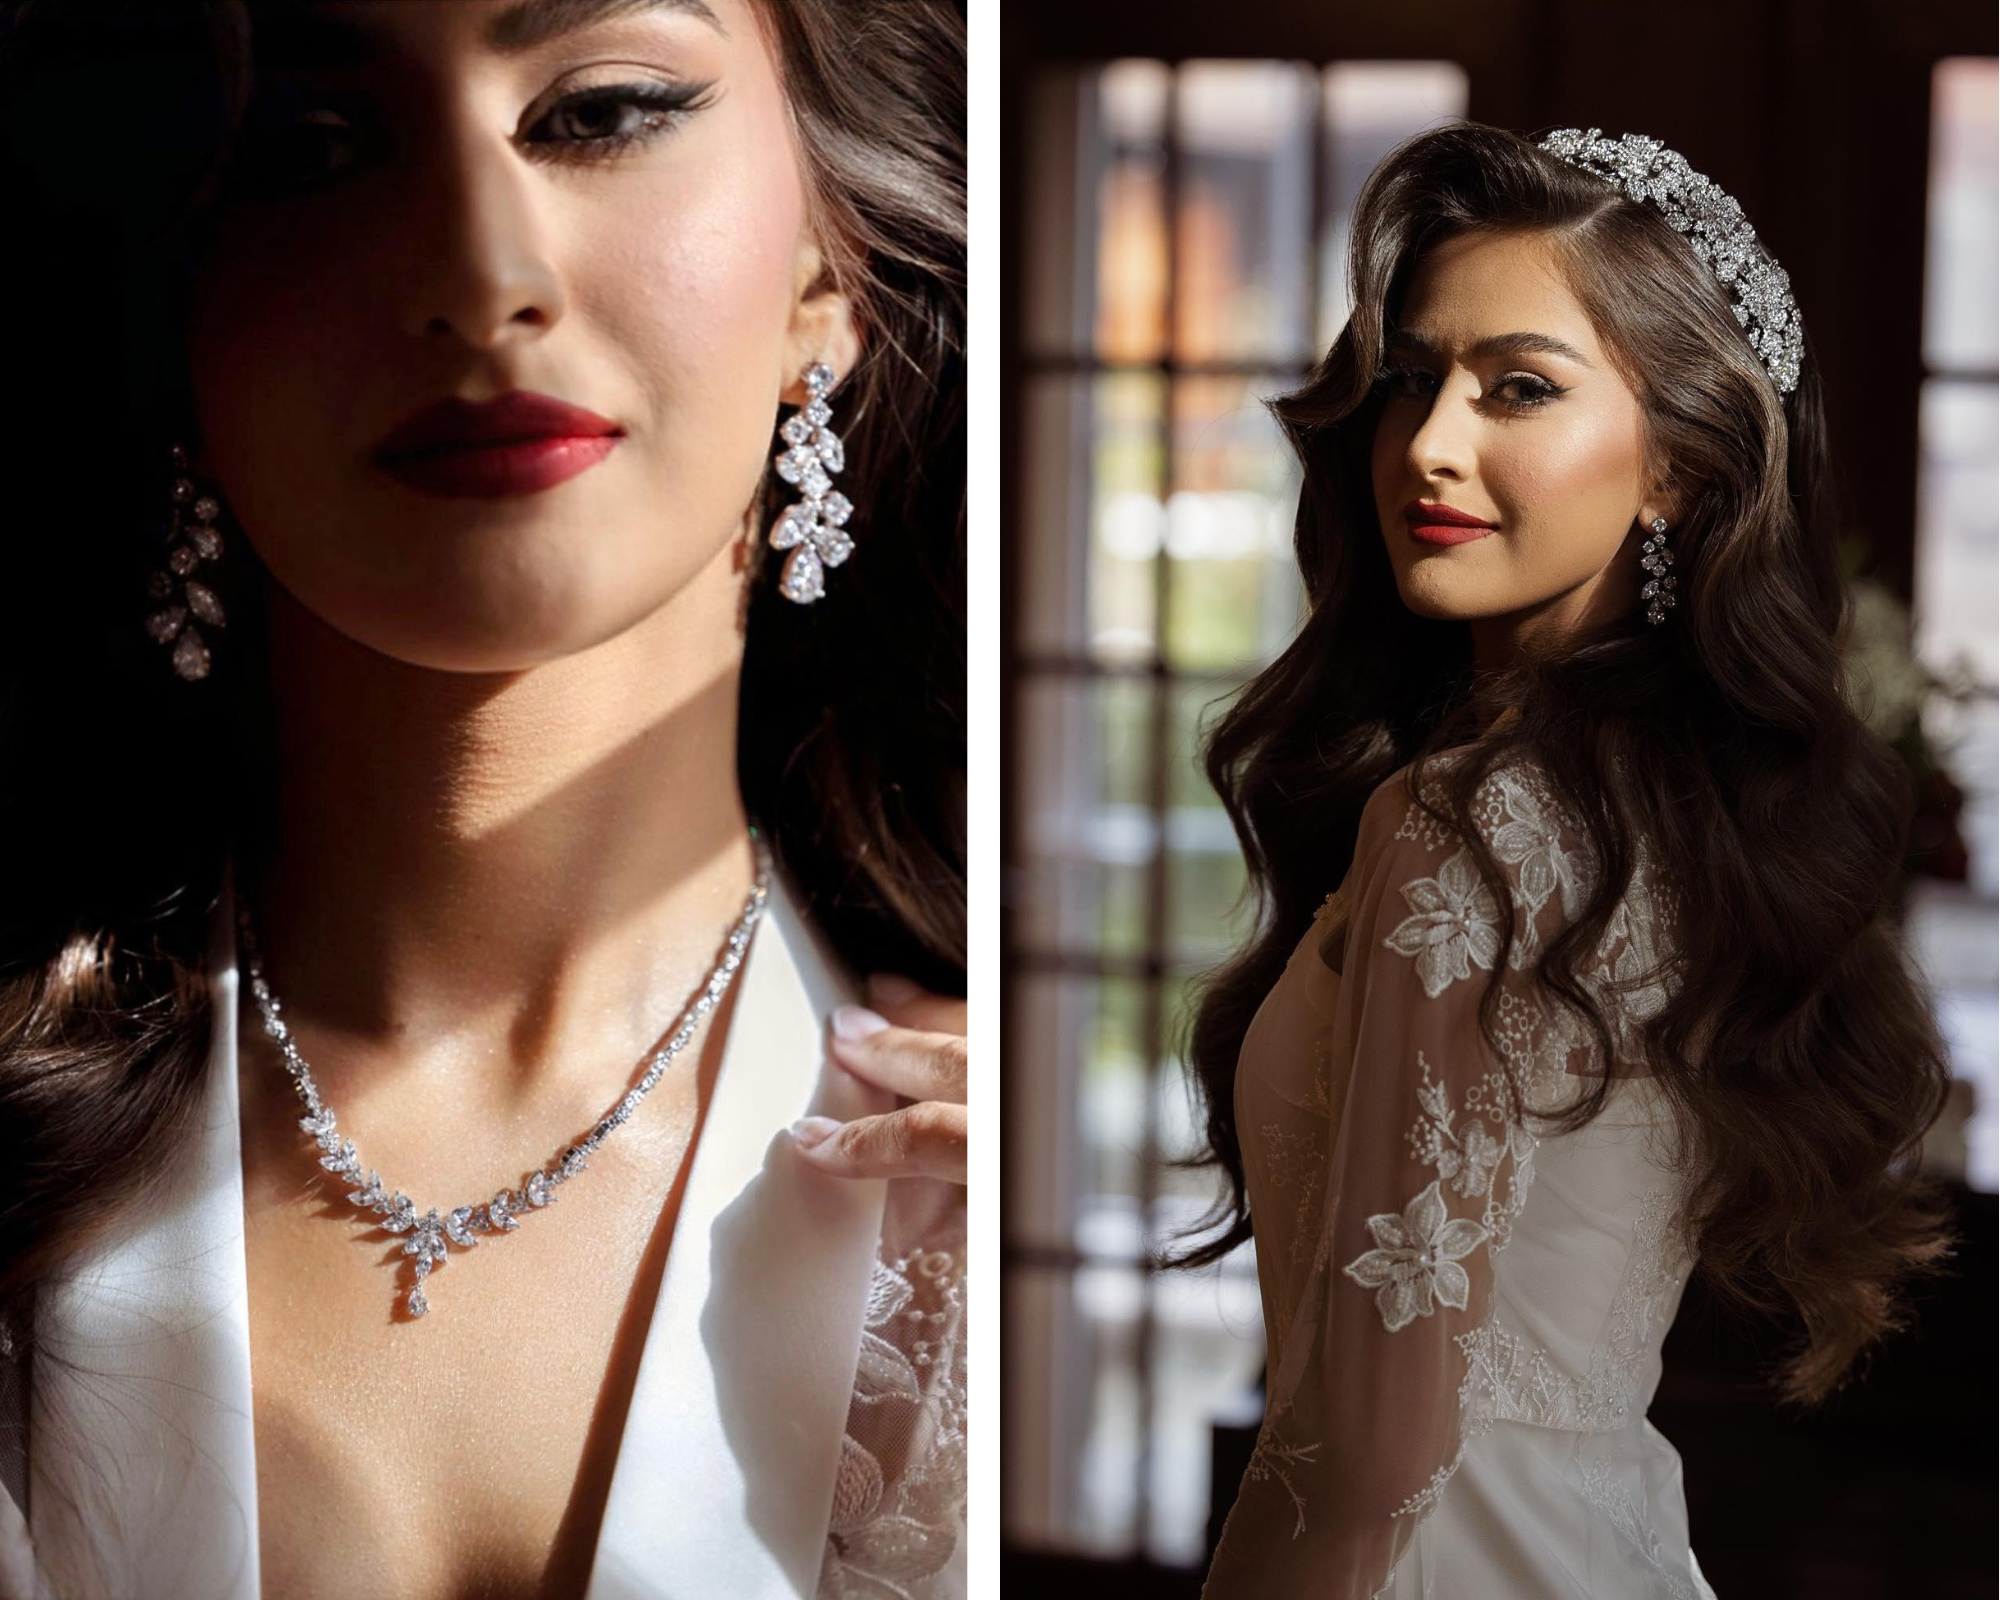 A beautiful brunette bride. Her hair is down and she is wearing a Swarovski crystal headpiece, earrings, and necklace.